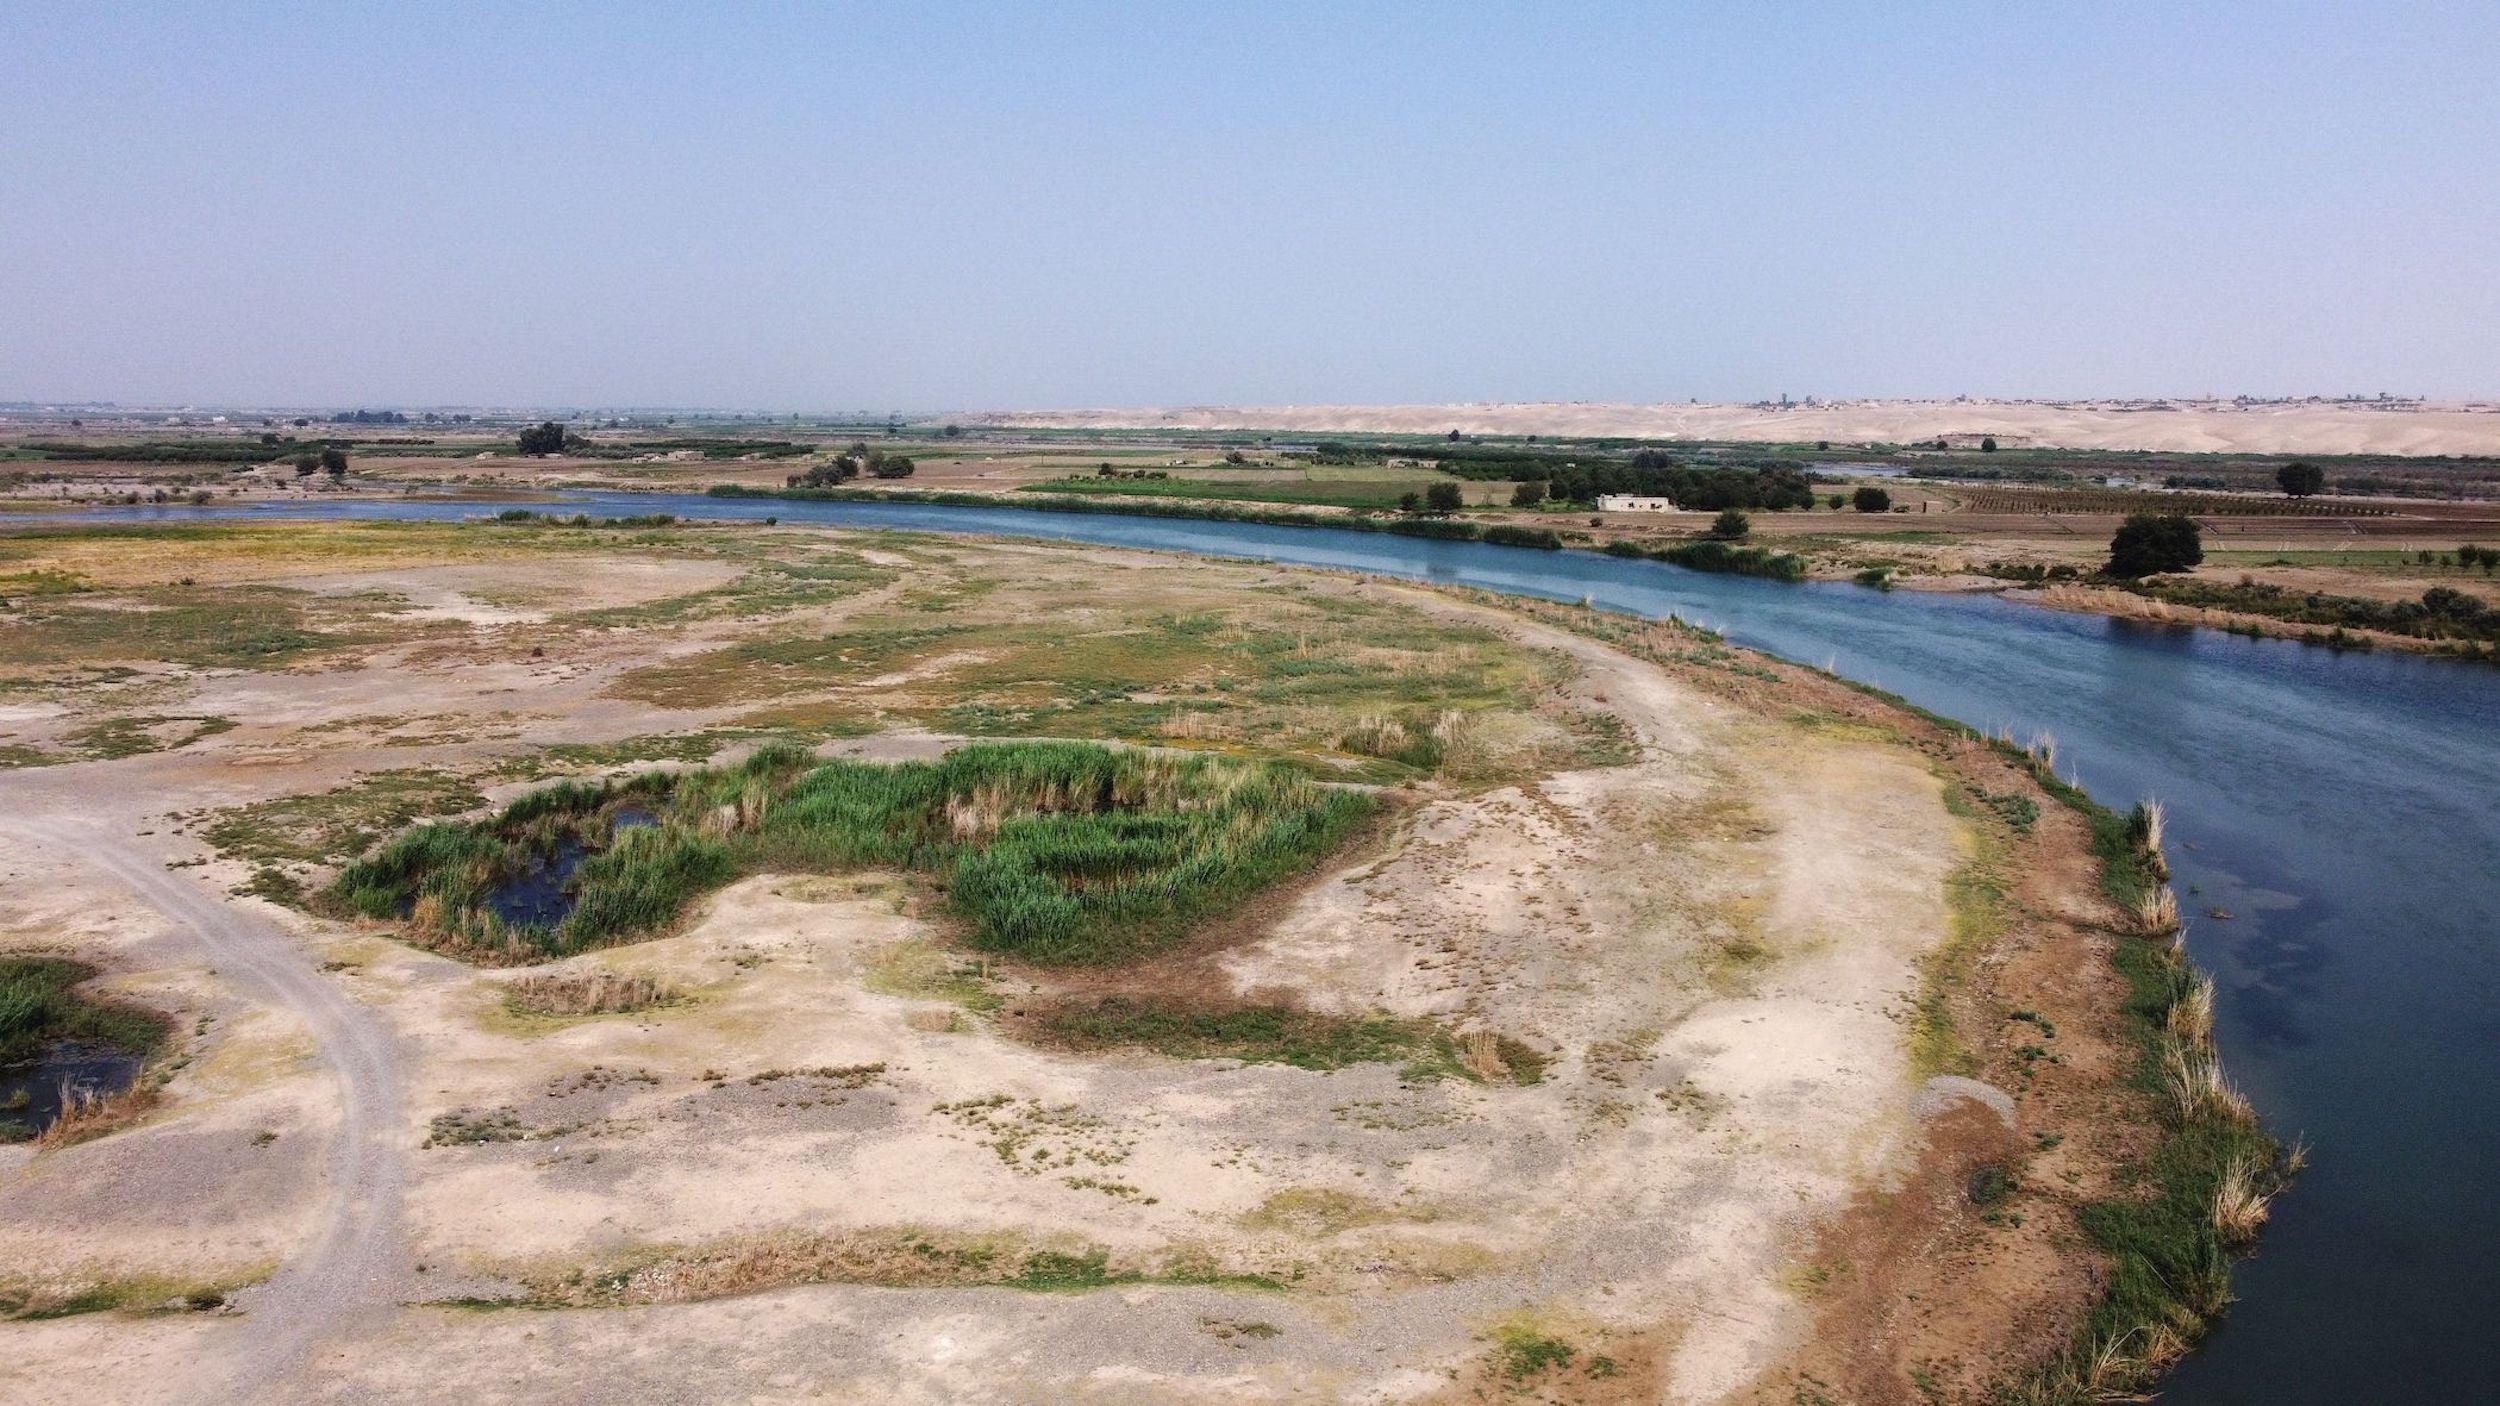 A general view of the Euphrates river in the western countryside of Raqa.